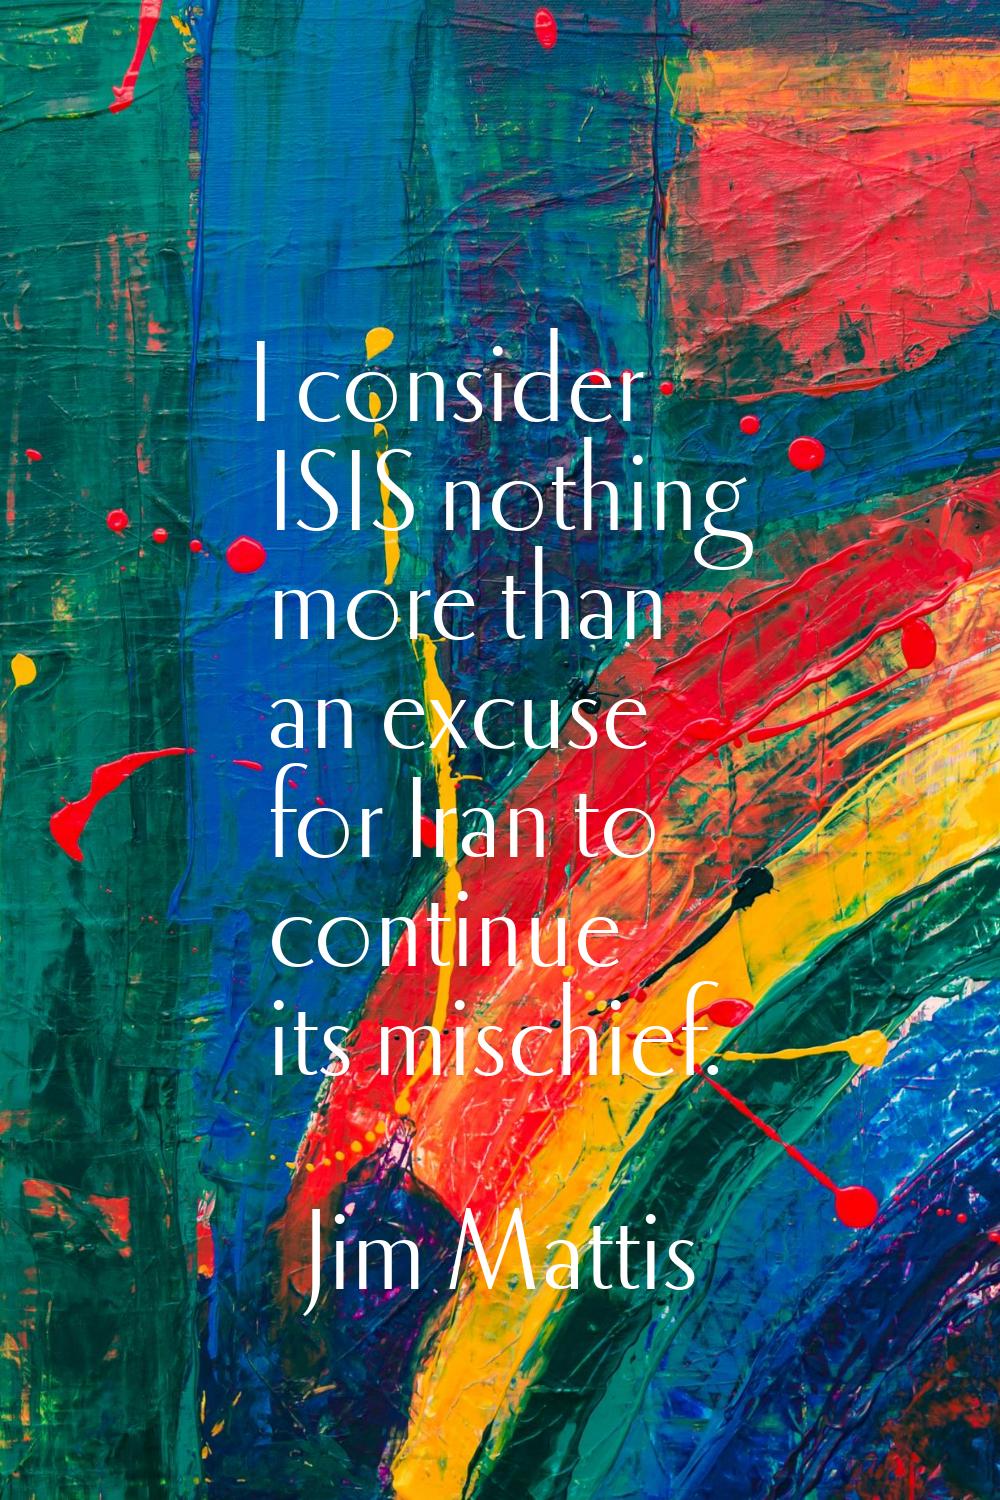 I consider ISIS nothing more than an excuse for Iran to continue its mischief.